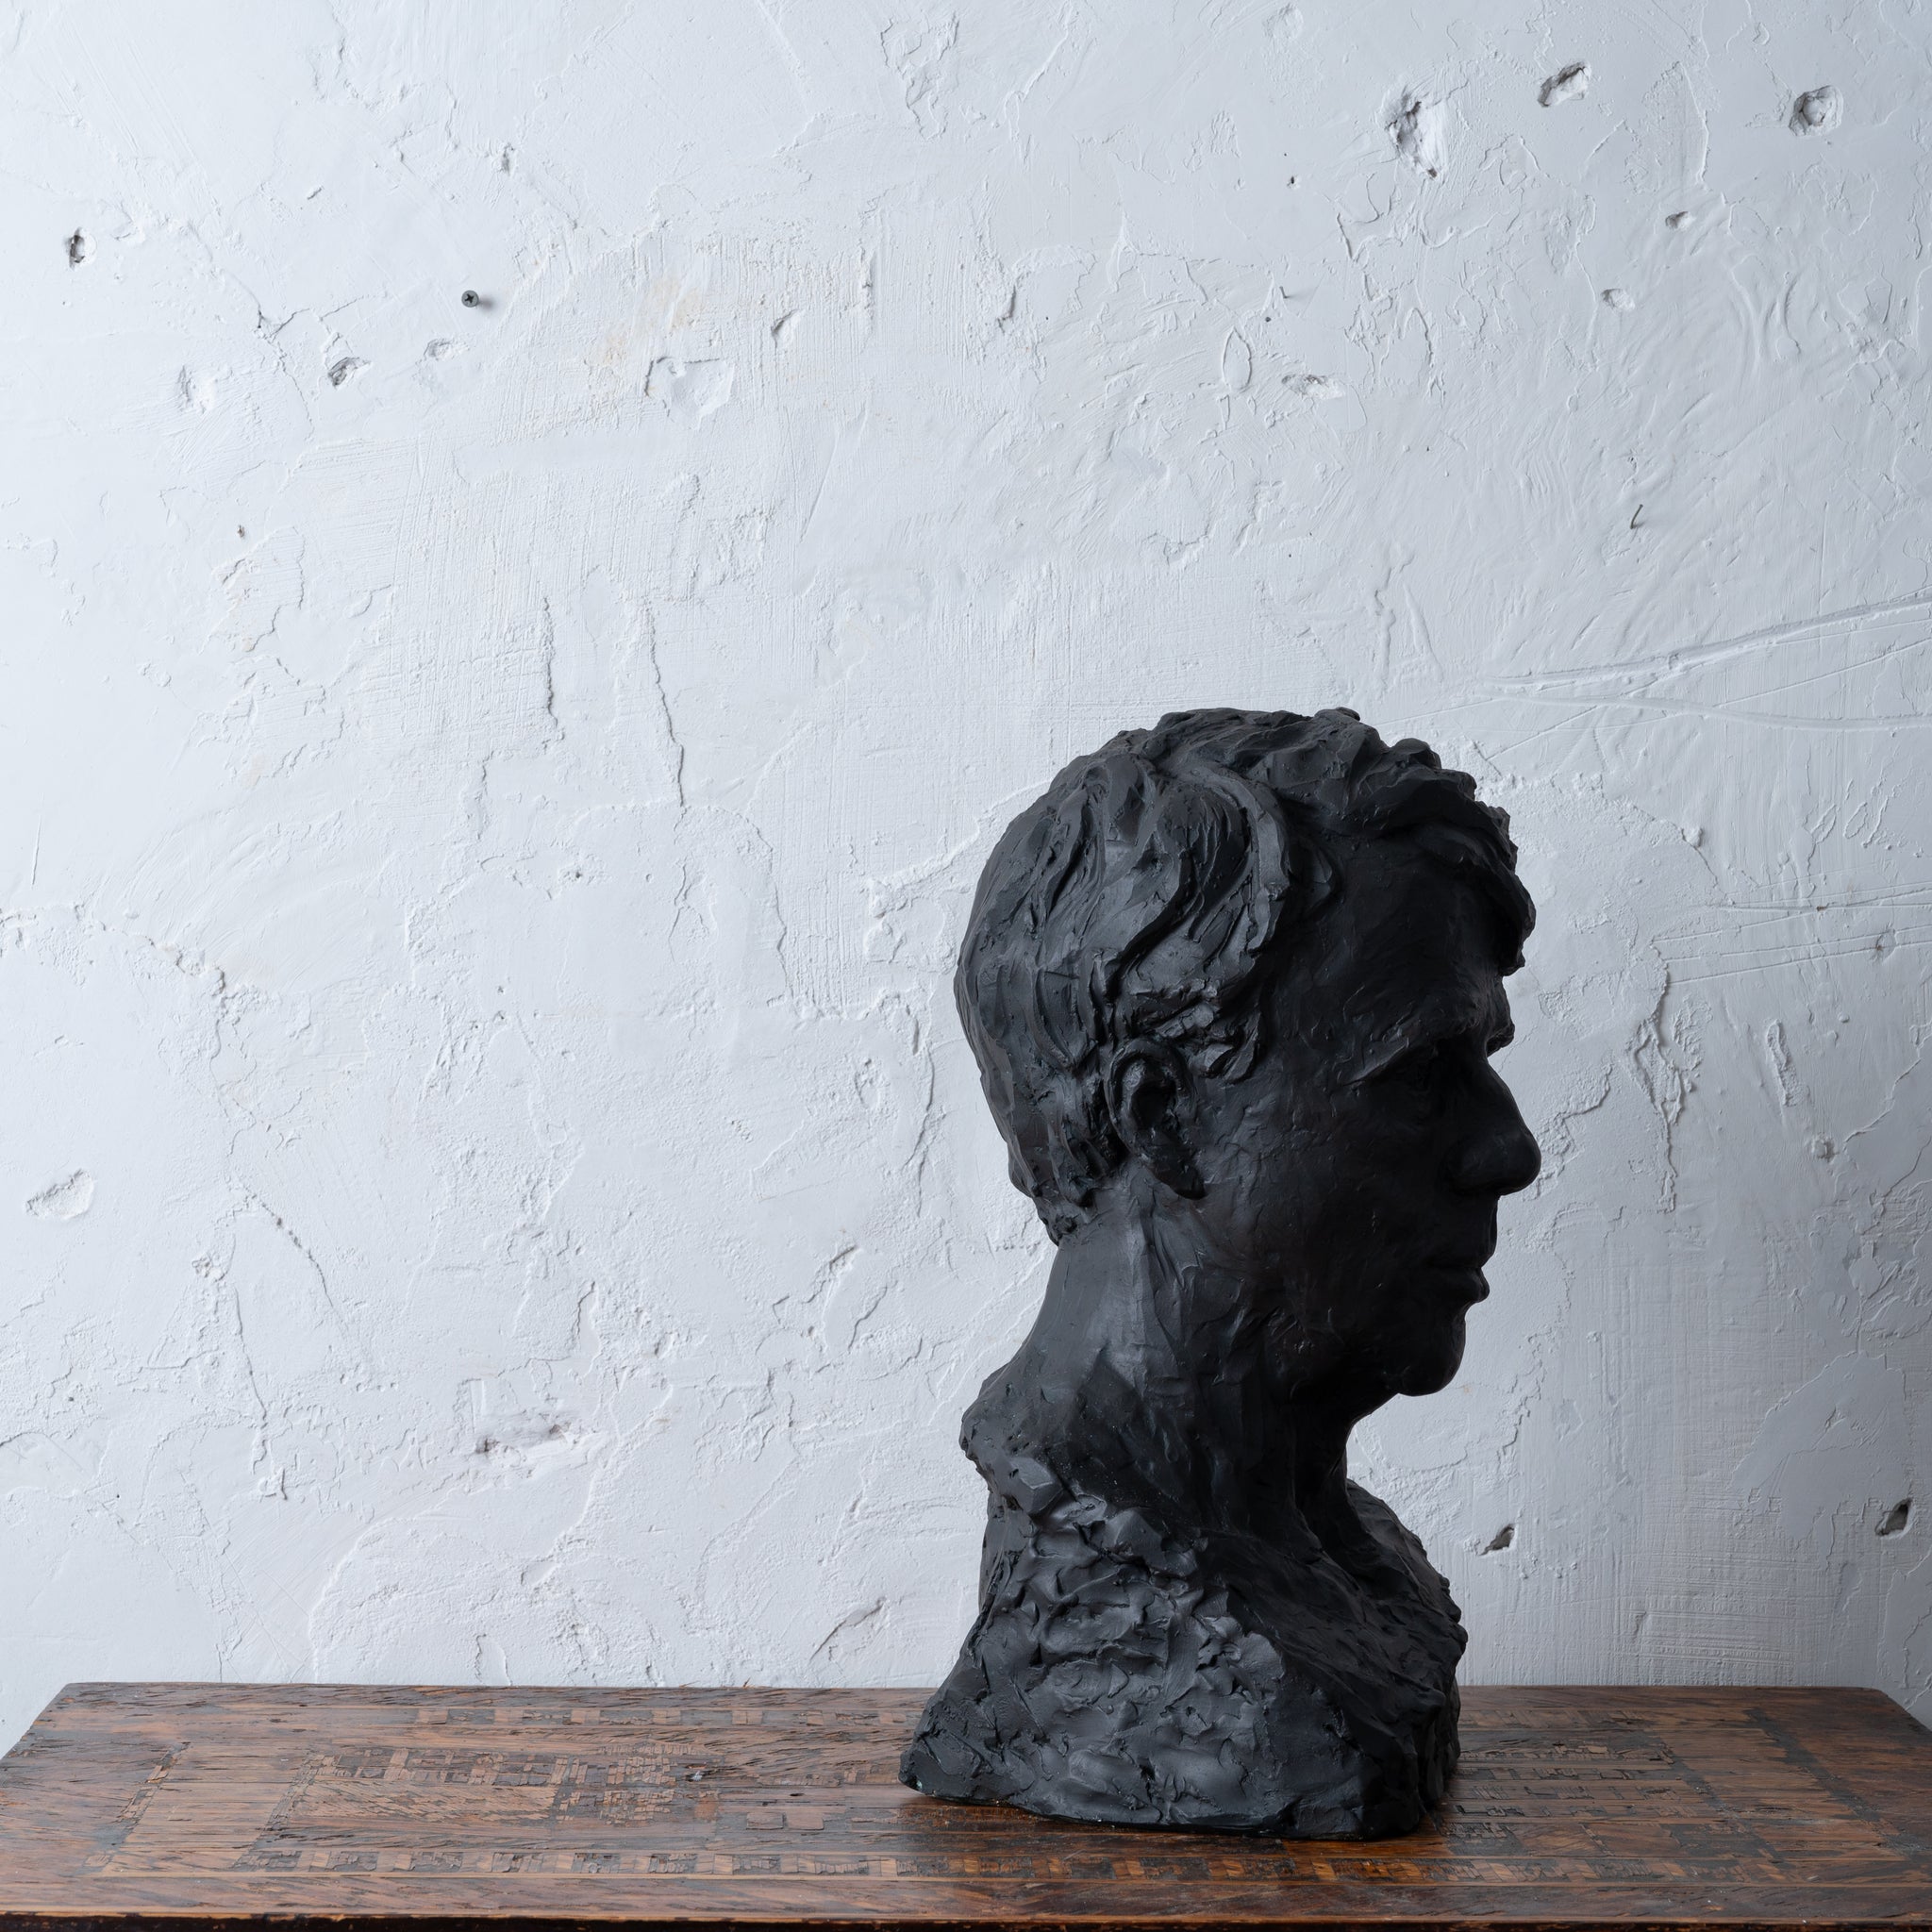 Robert Frost Bust by Florence Fiore, c.1930s